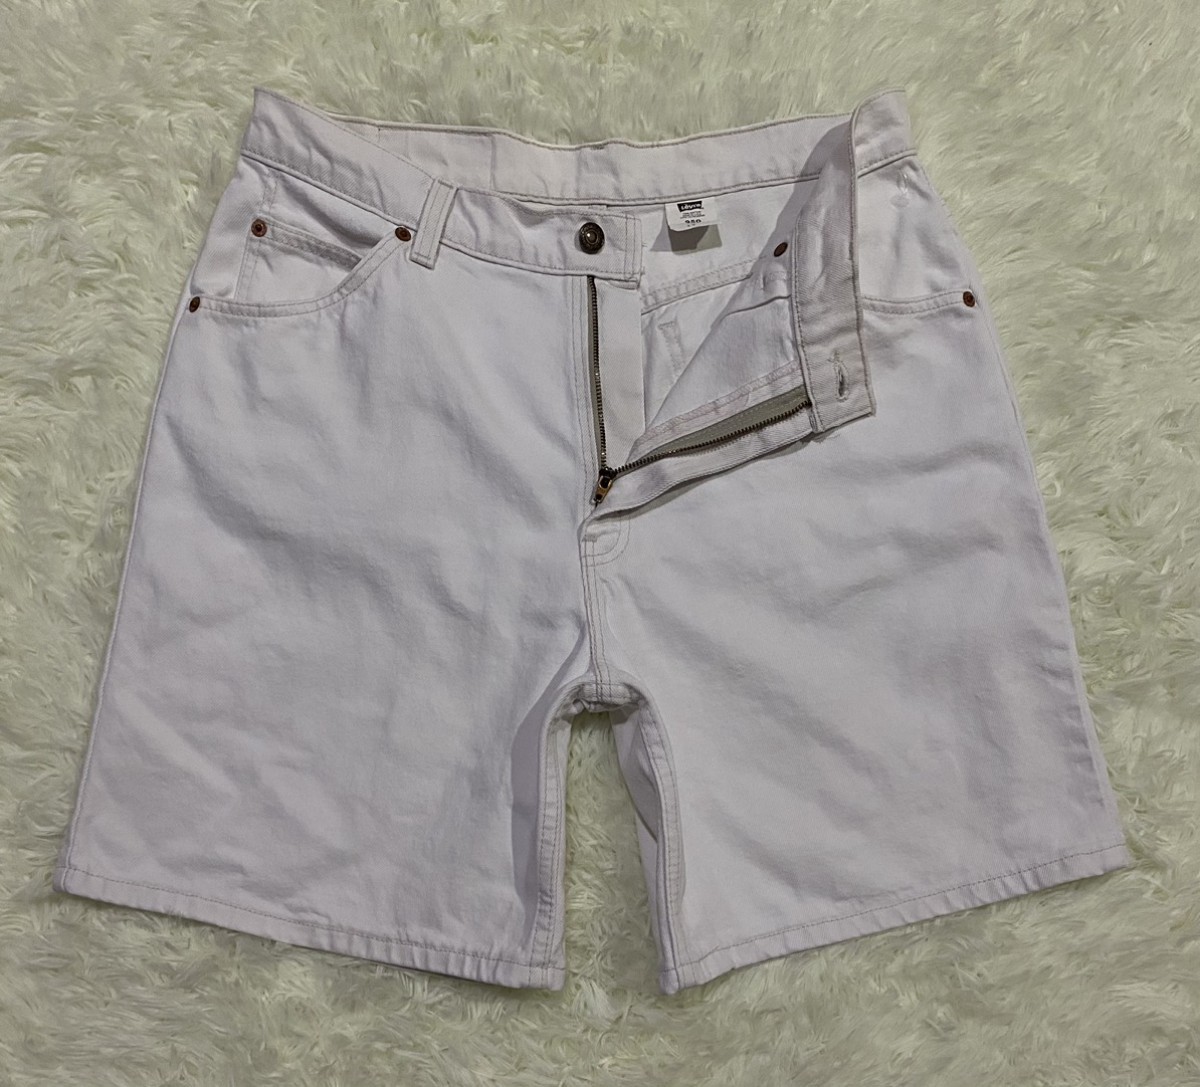 950 Relaxed Fit Orange Tag Short - 7